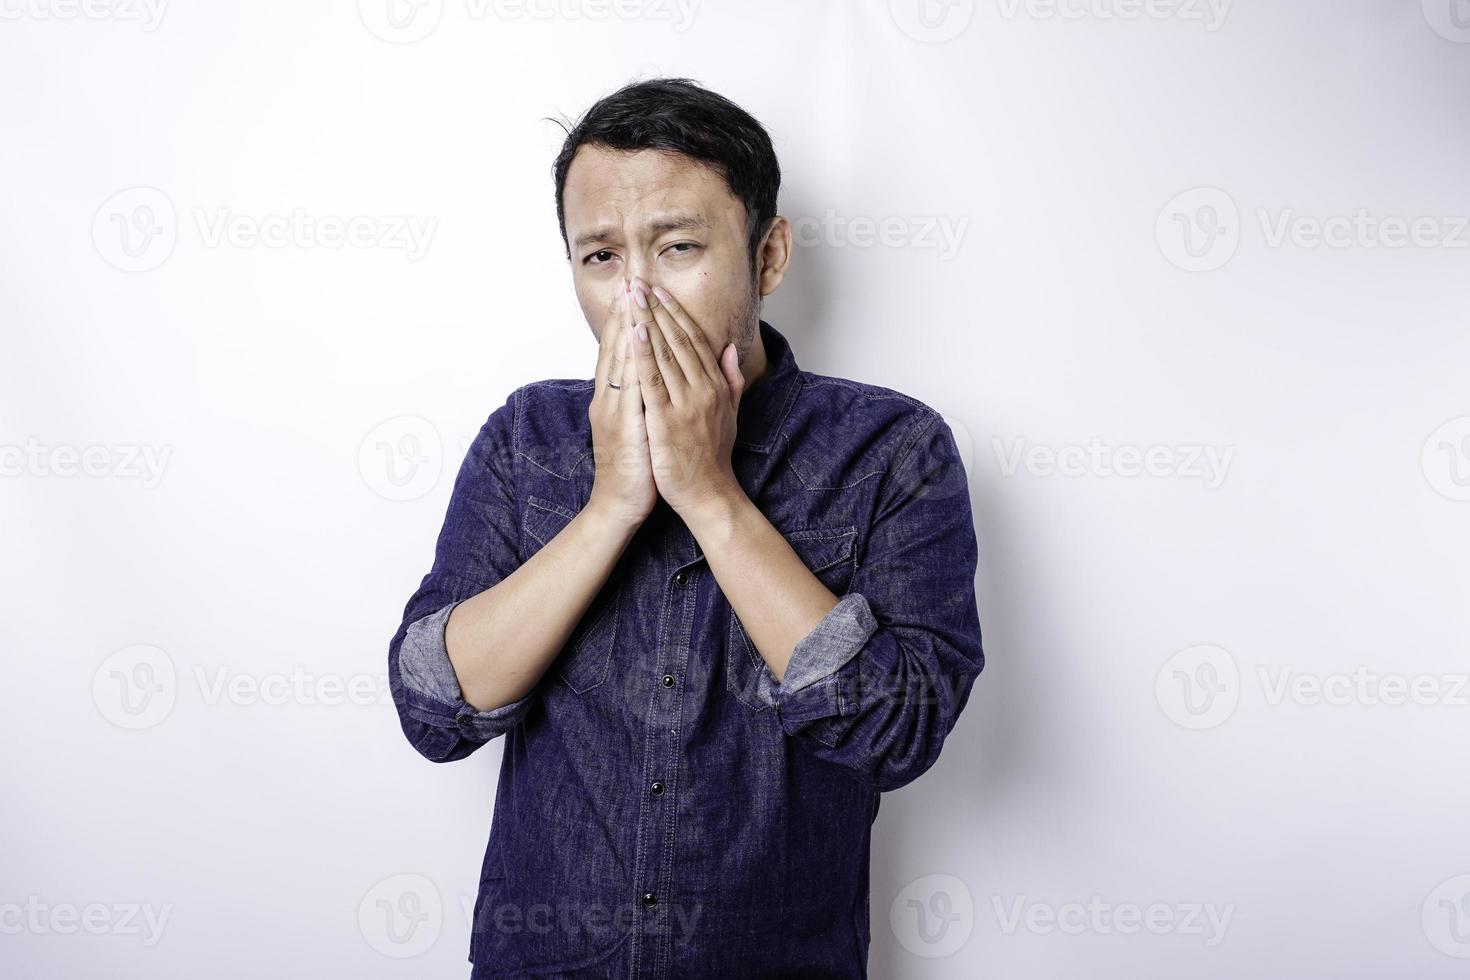 A portrait of an Asian man wearing a blue shirt isolated by white background looks depressed photo